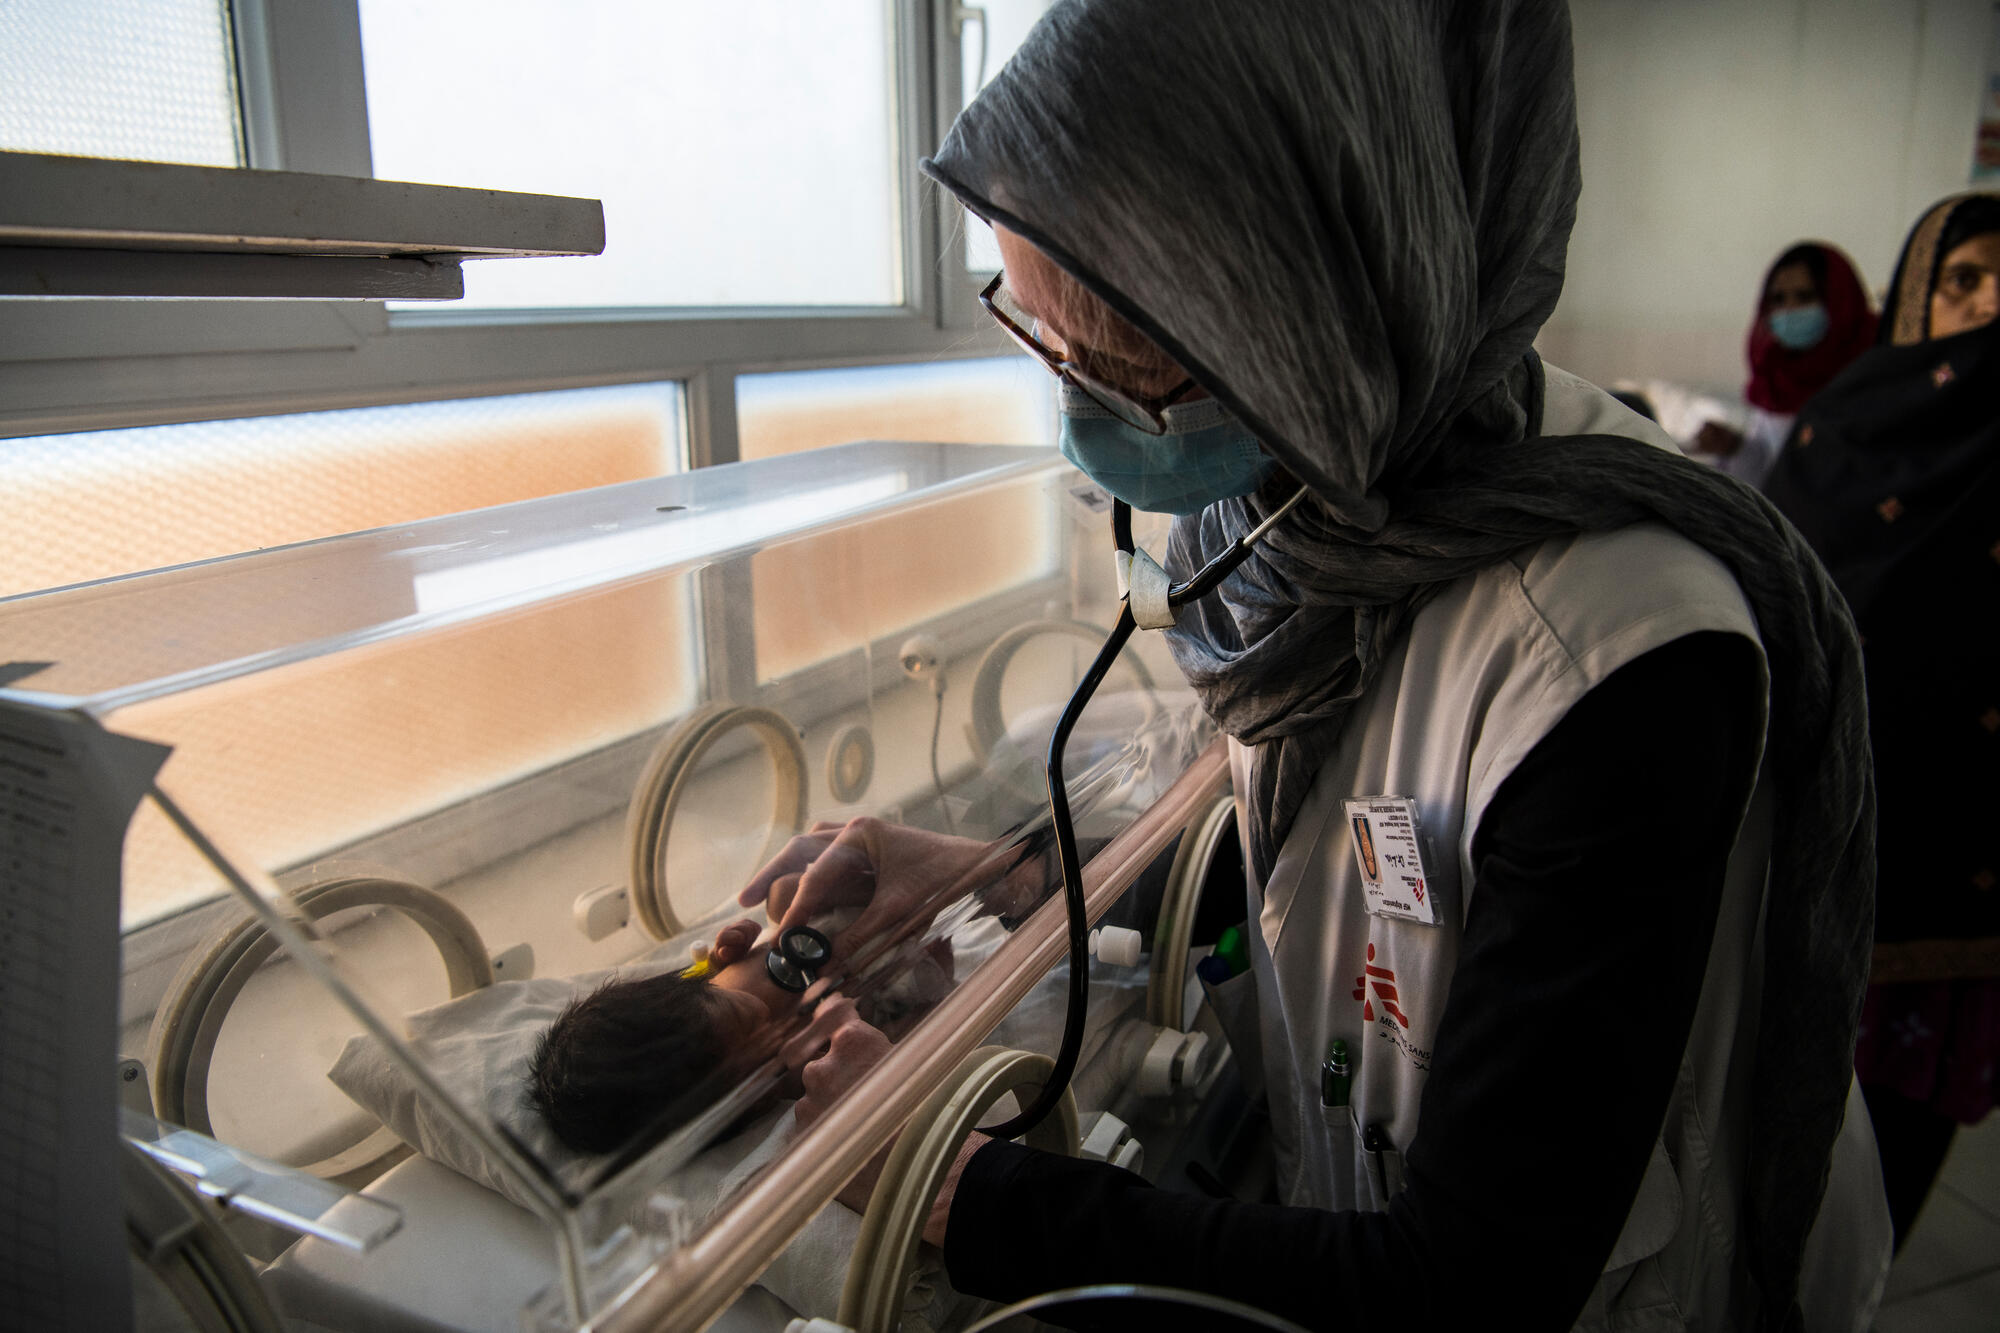 EXPLAINED: THE HEALTHCARE CRISIS IN AFGHANISTAN